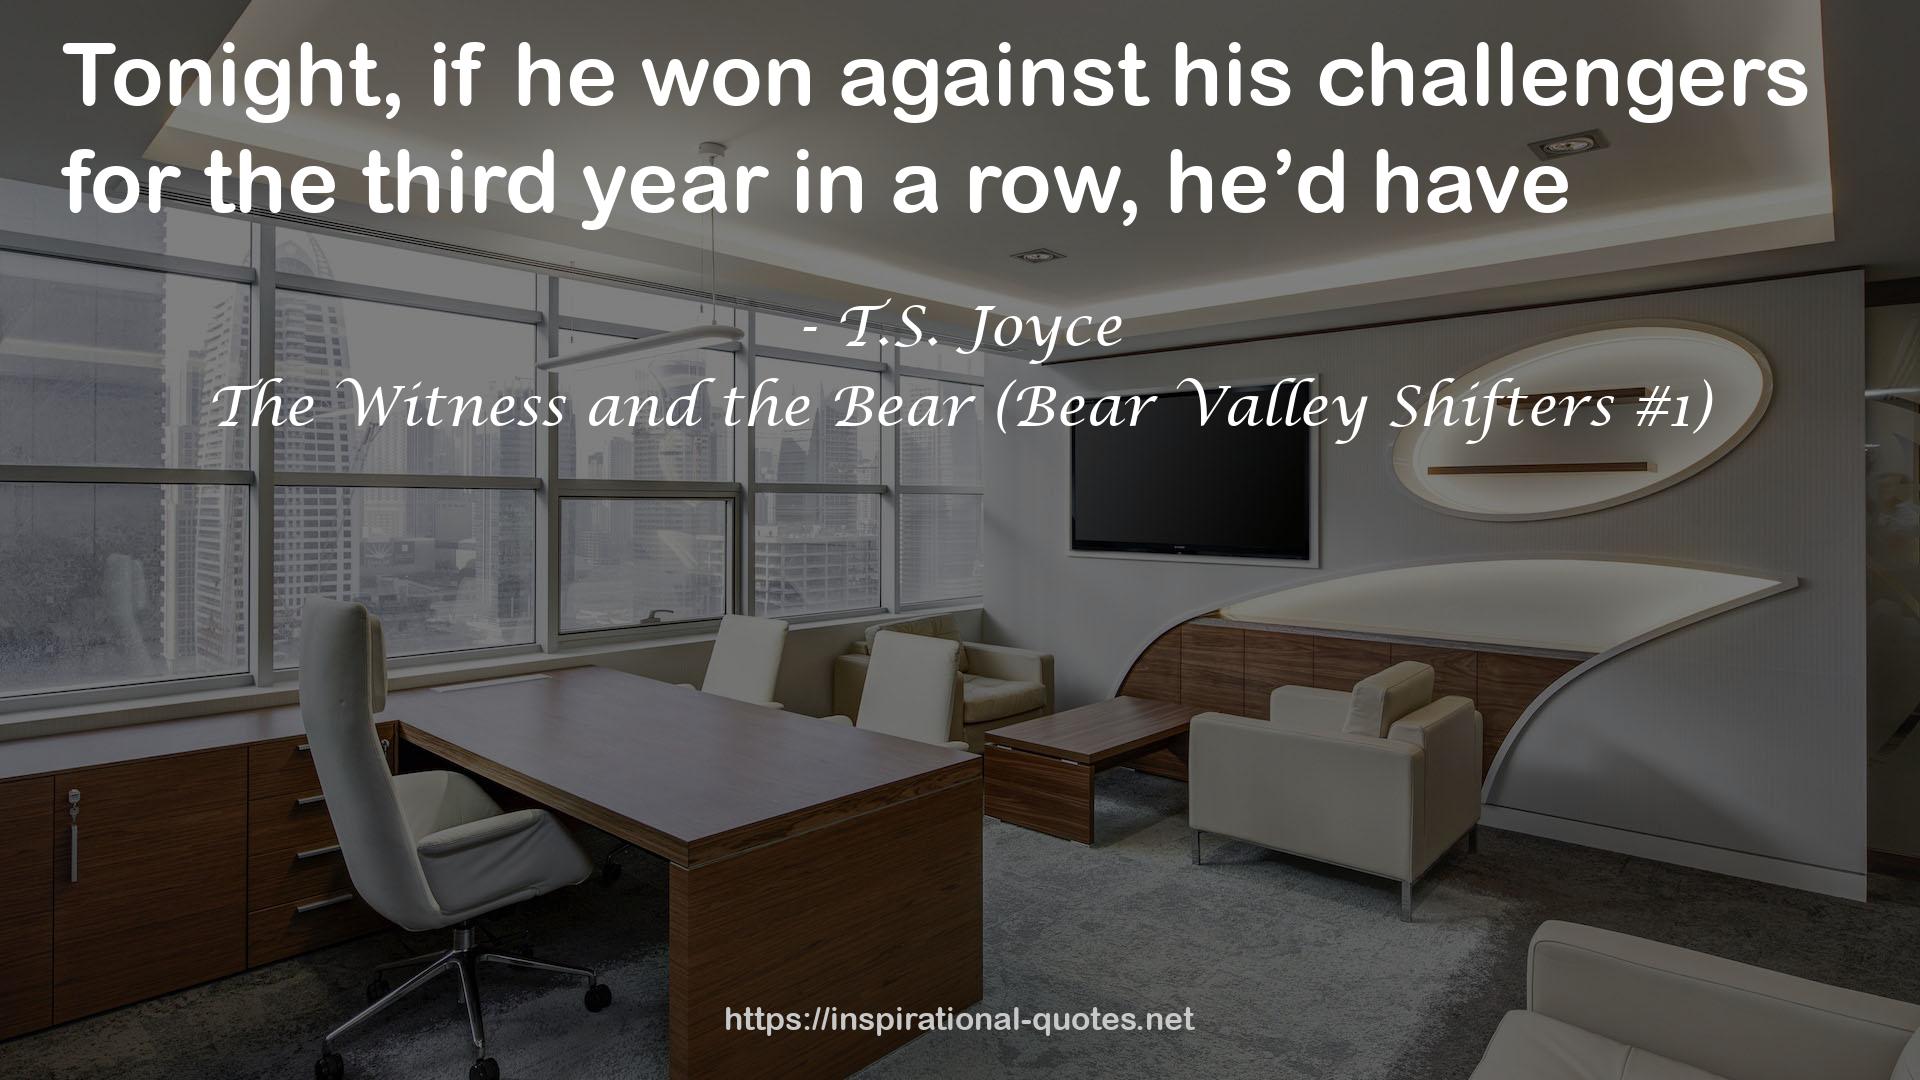 The Witness and the Bear (Bear Valley Shifters #1) QUOTES